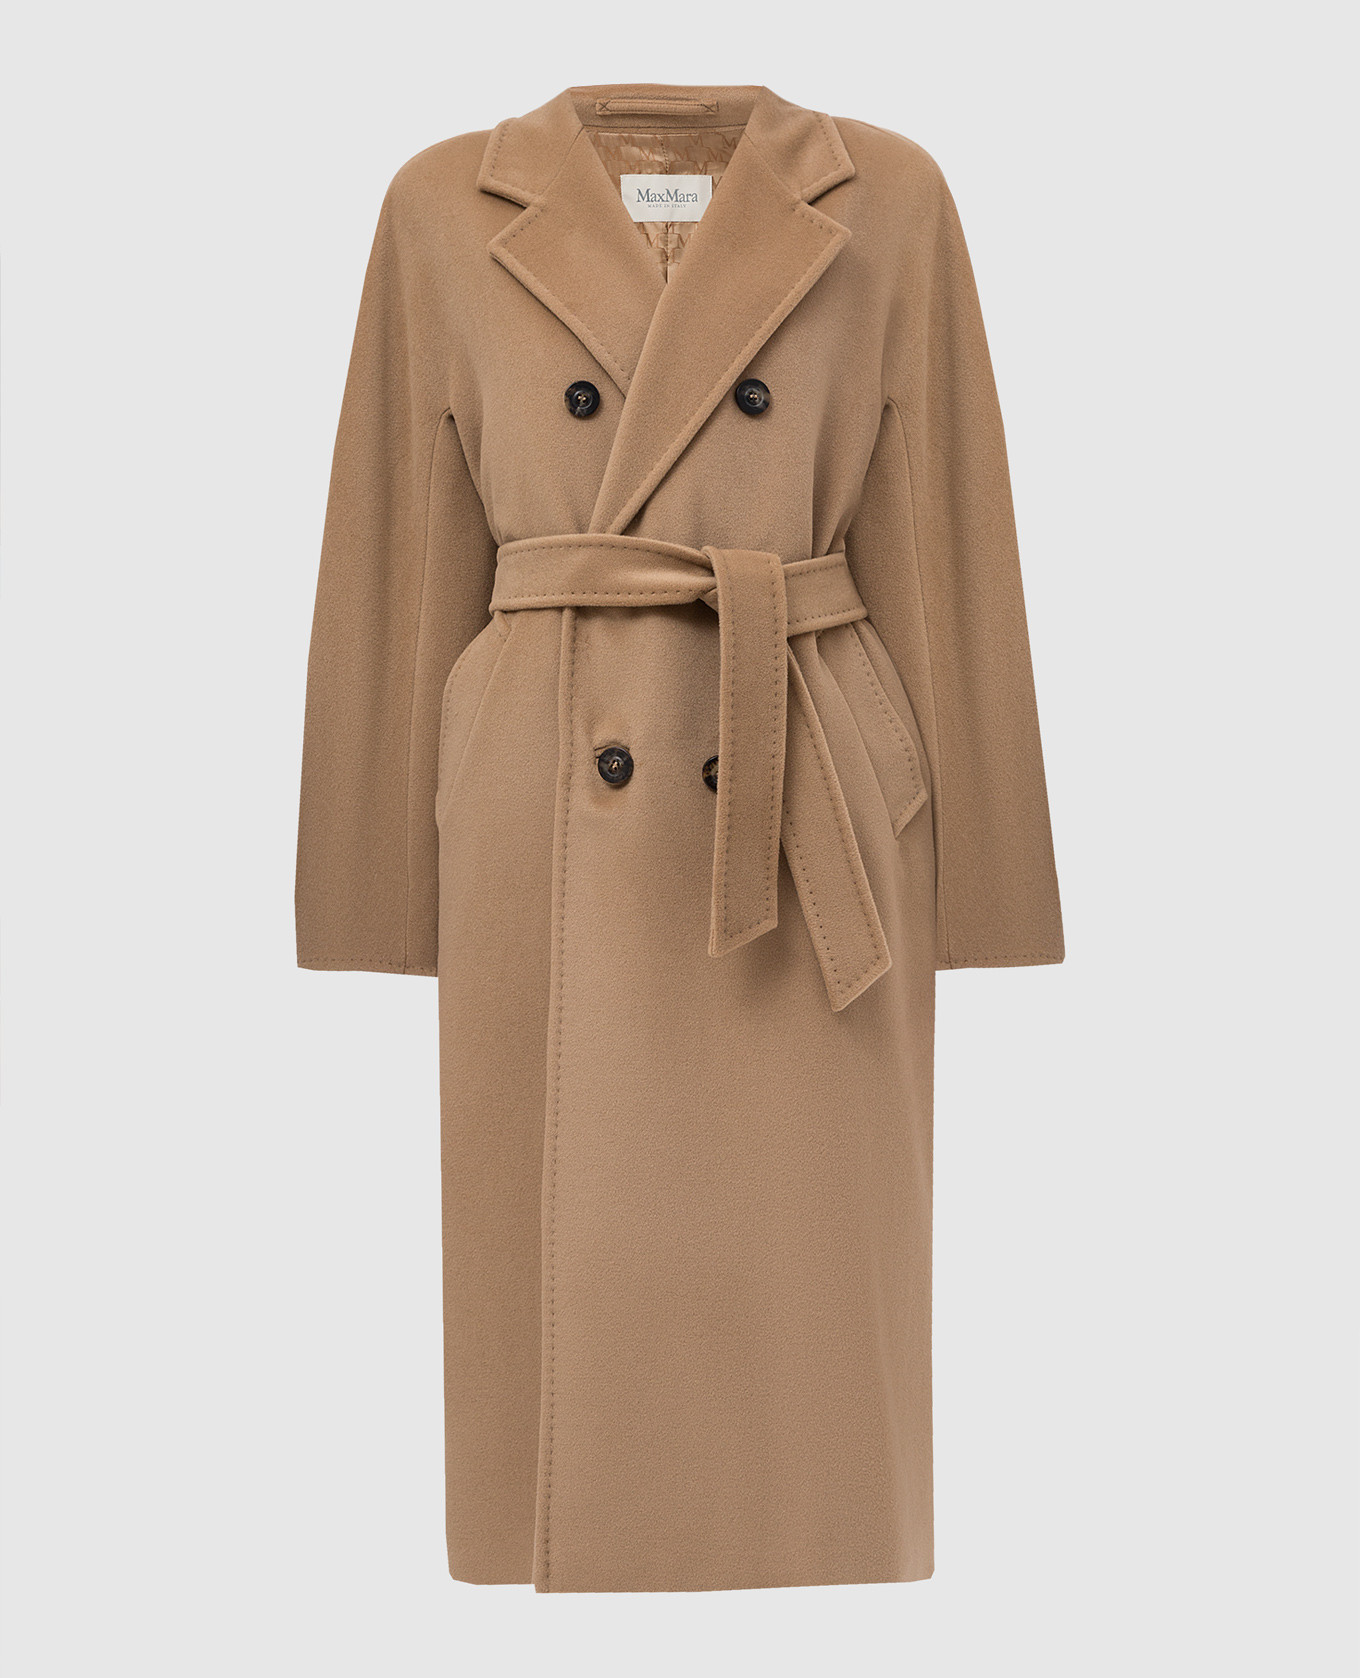 Madame wool and cashmere double-breasted coat in tan